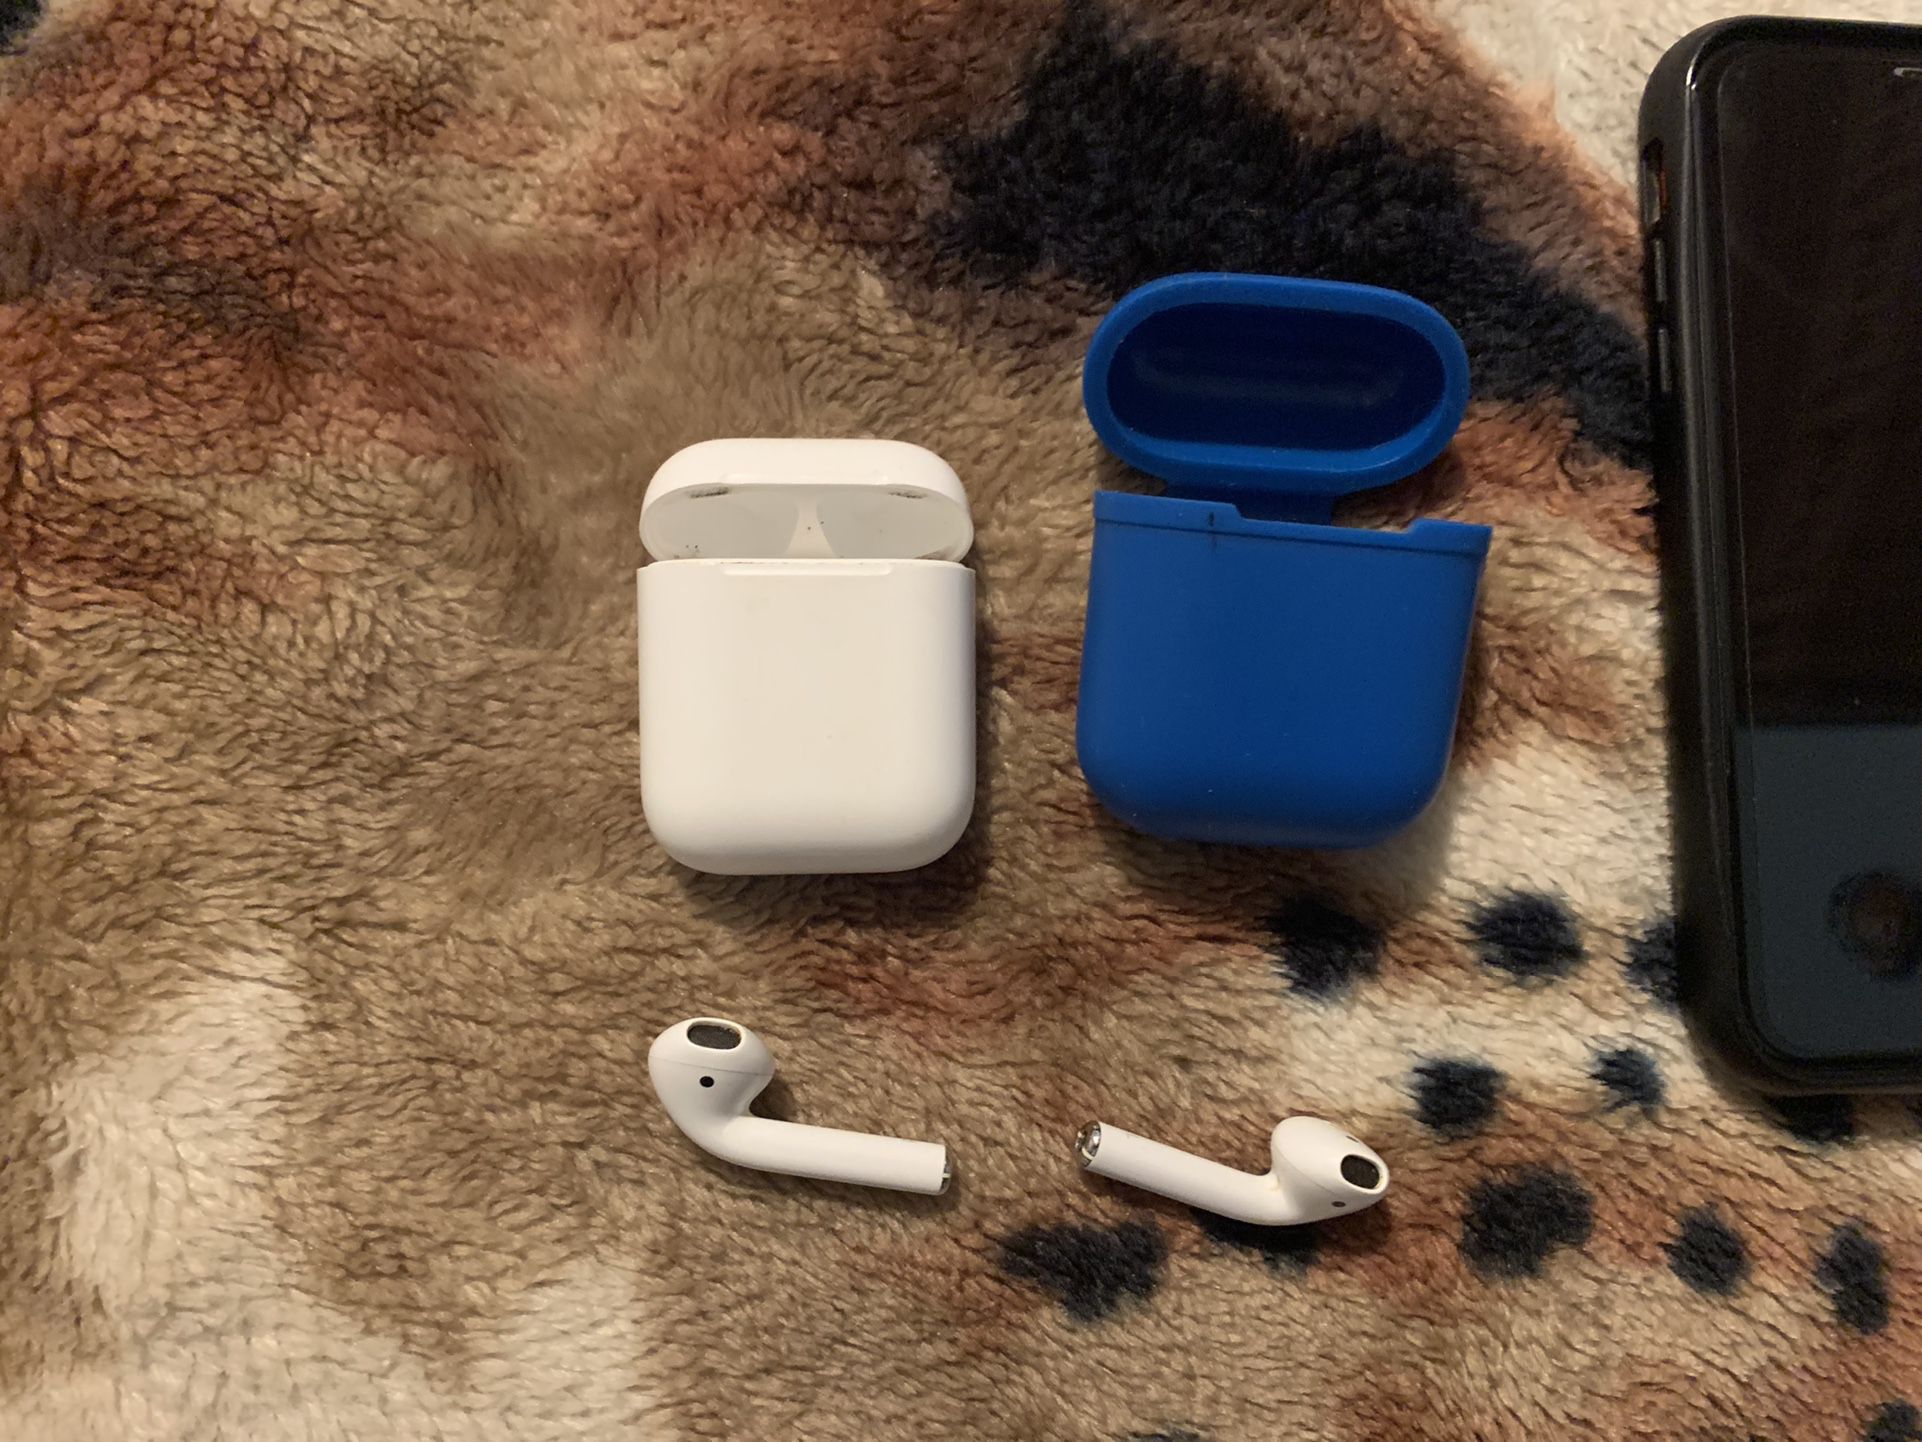 Apple Watch, AirPods, Iphone XR,